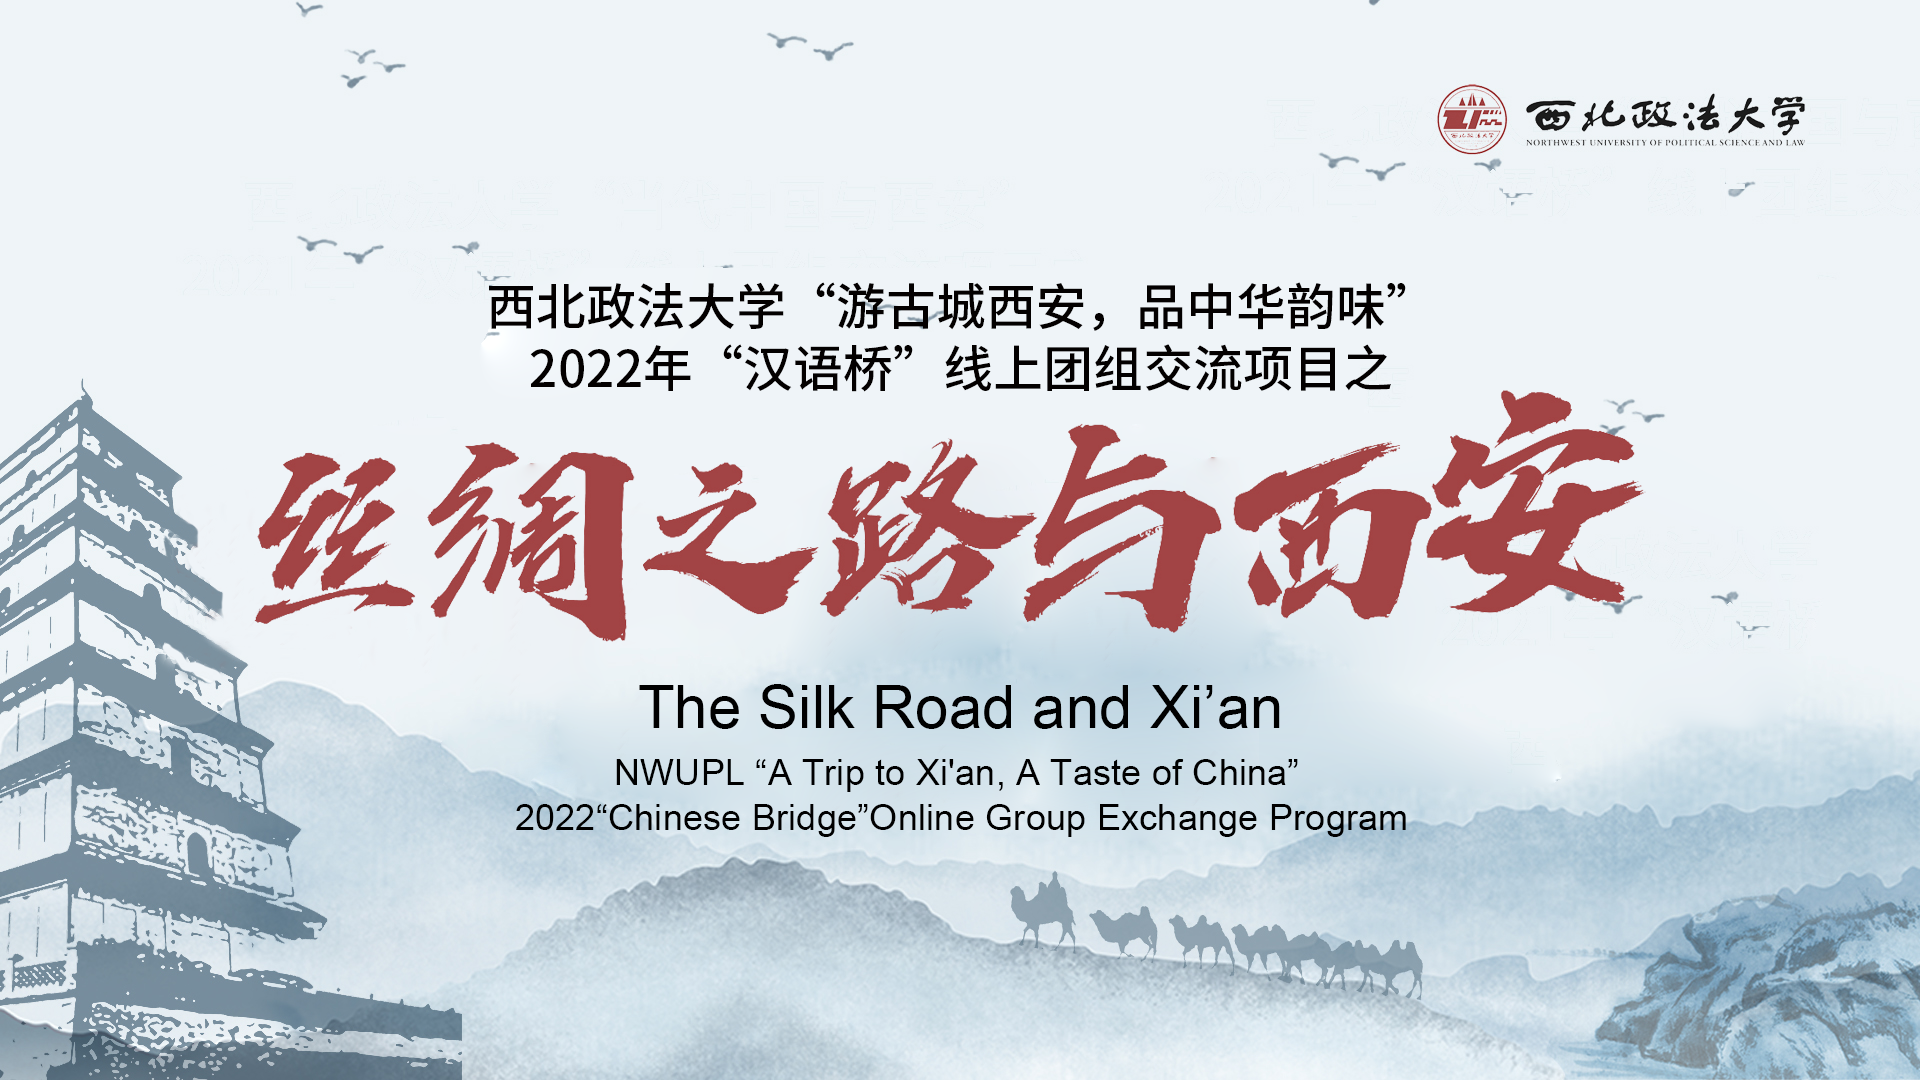 The Silk Road and Xi’an